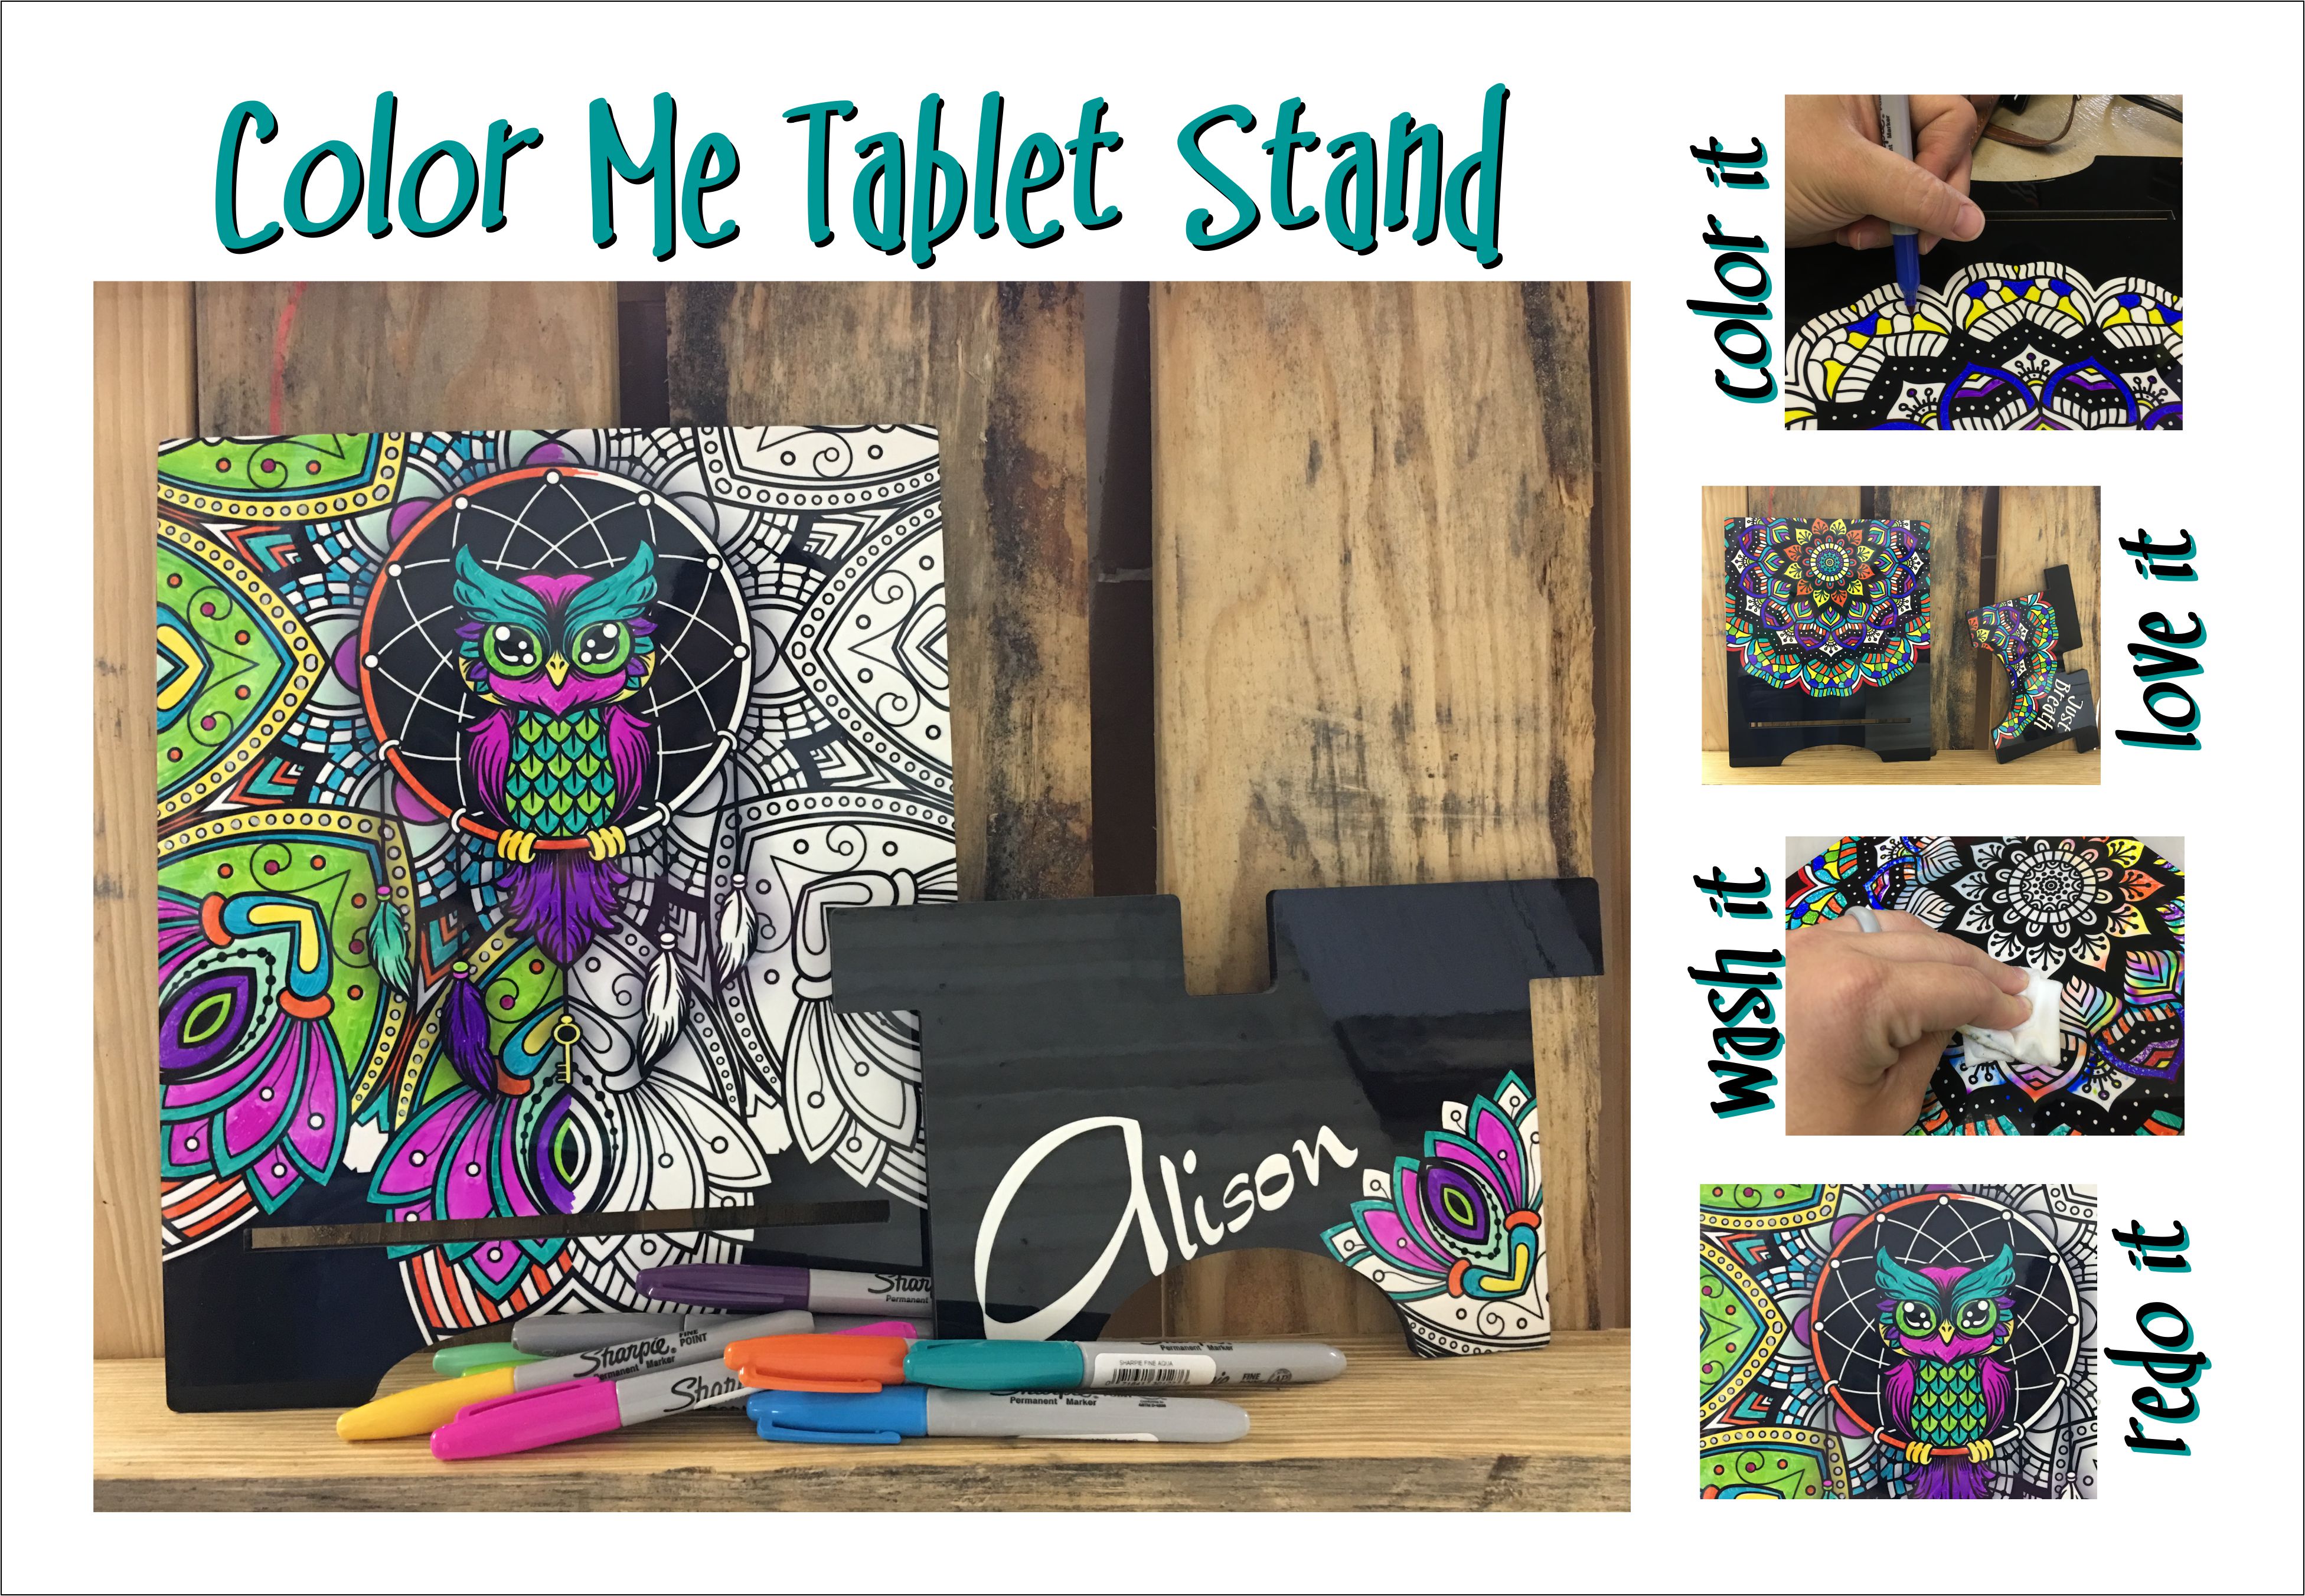 Color Me Tablet Stand made with sublimation printing